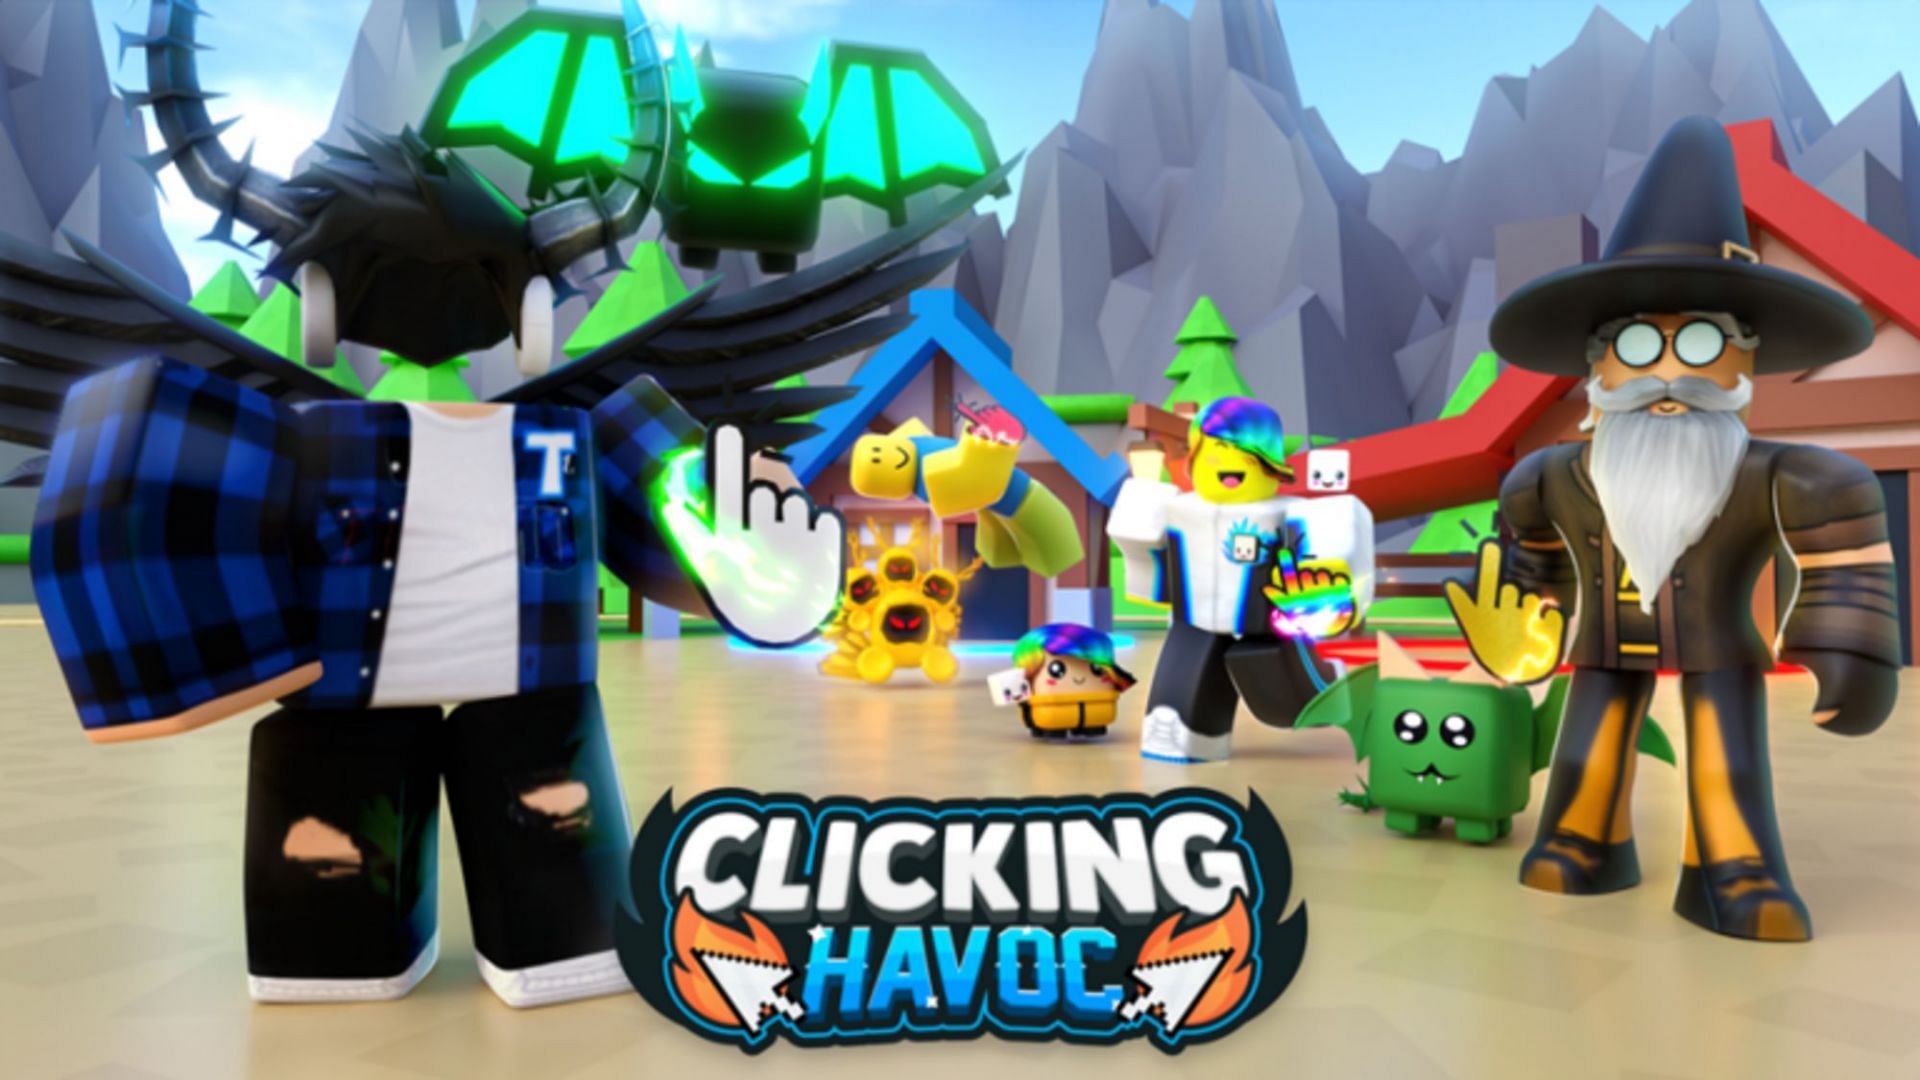 The clicking game (Image via Roblox)